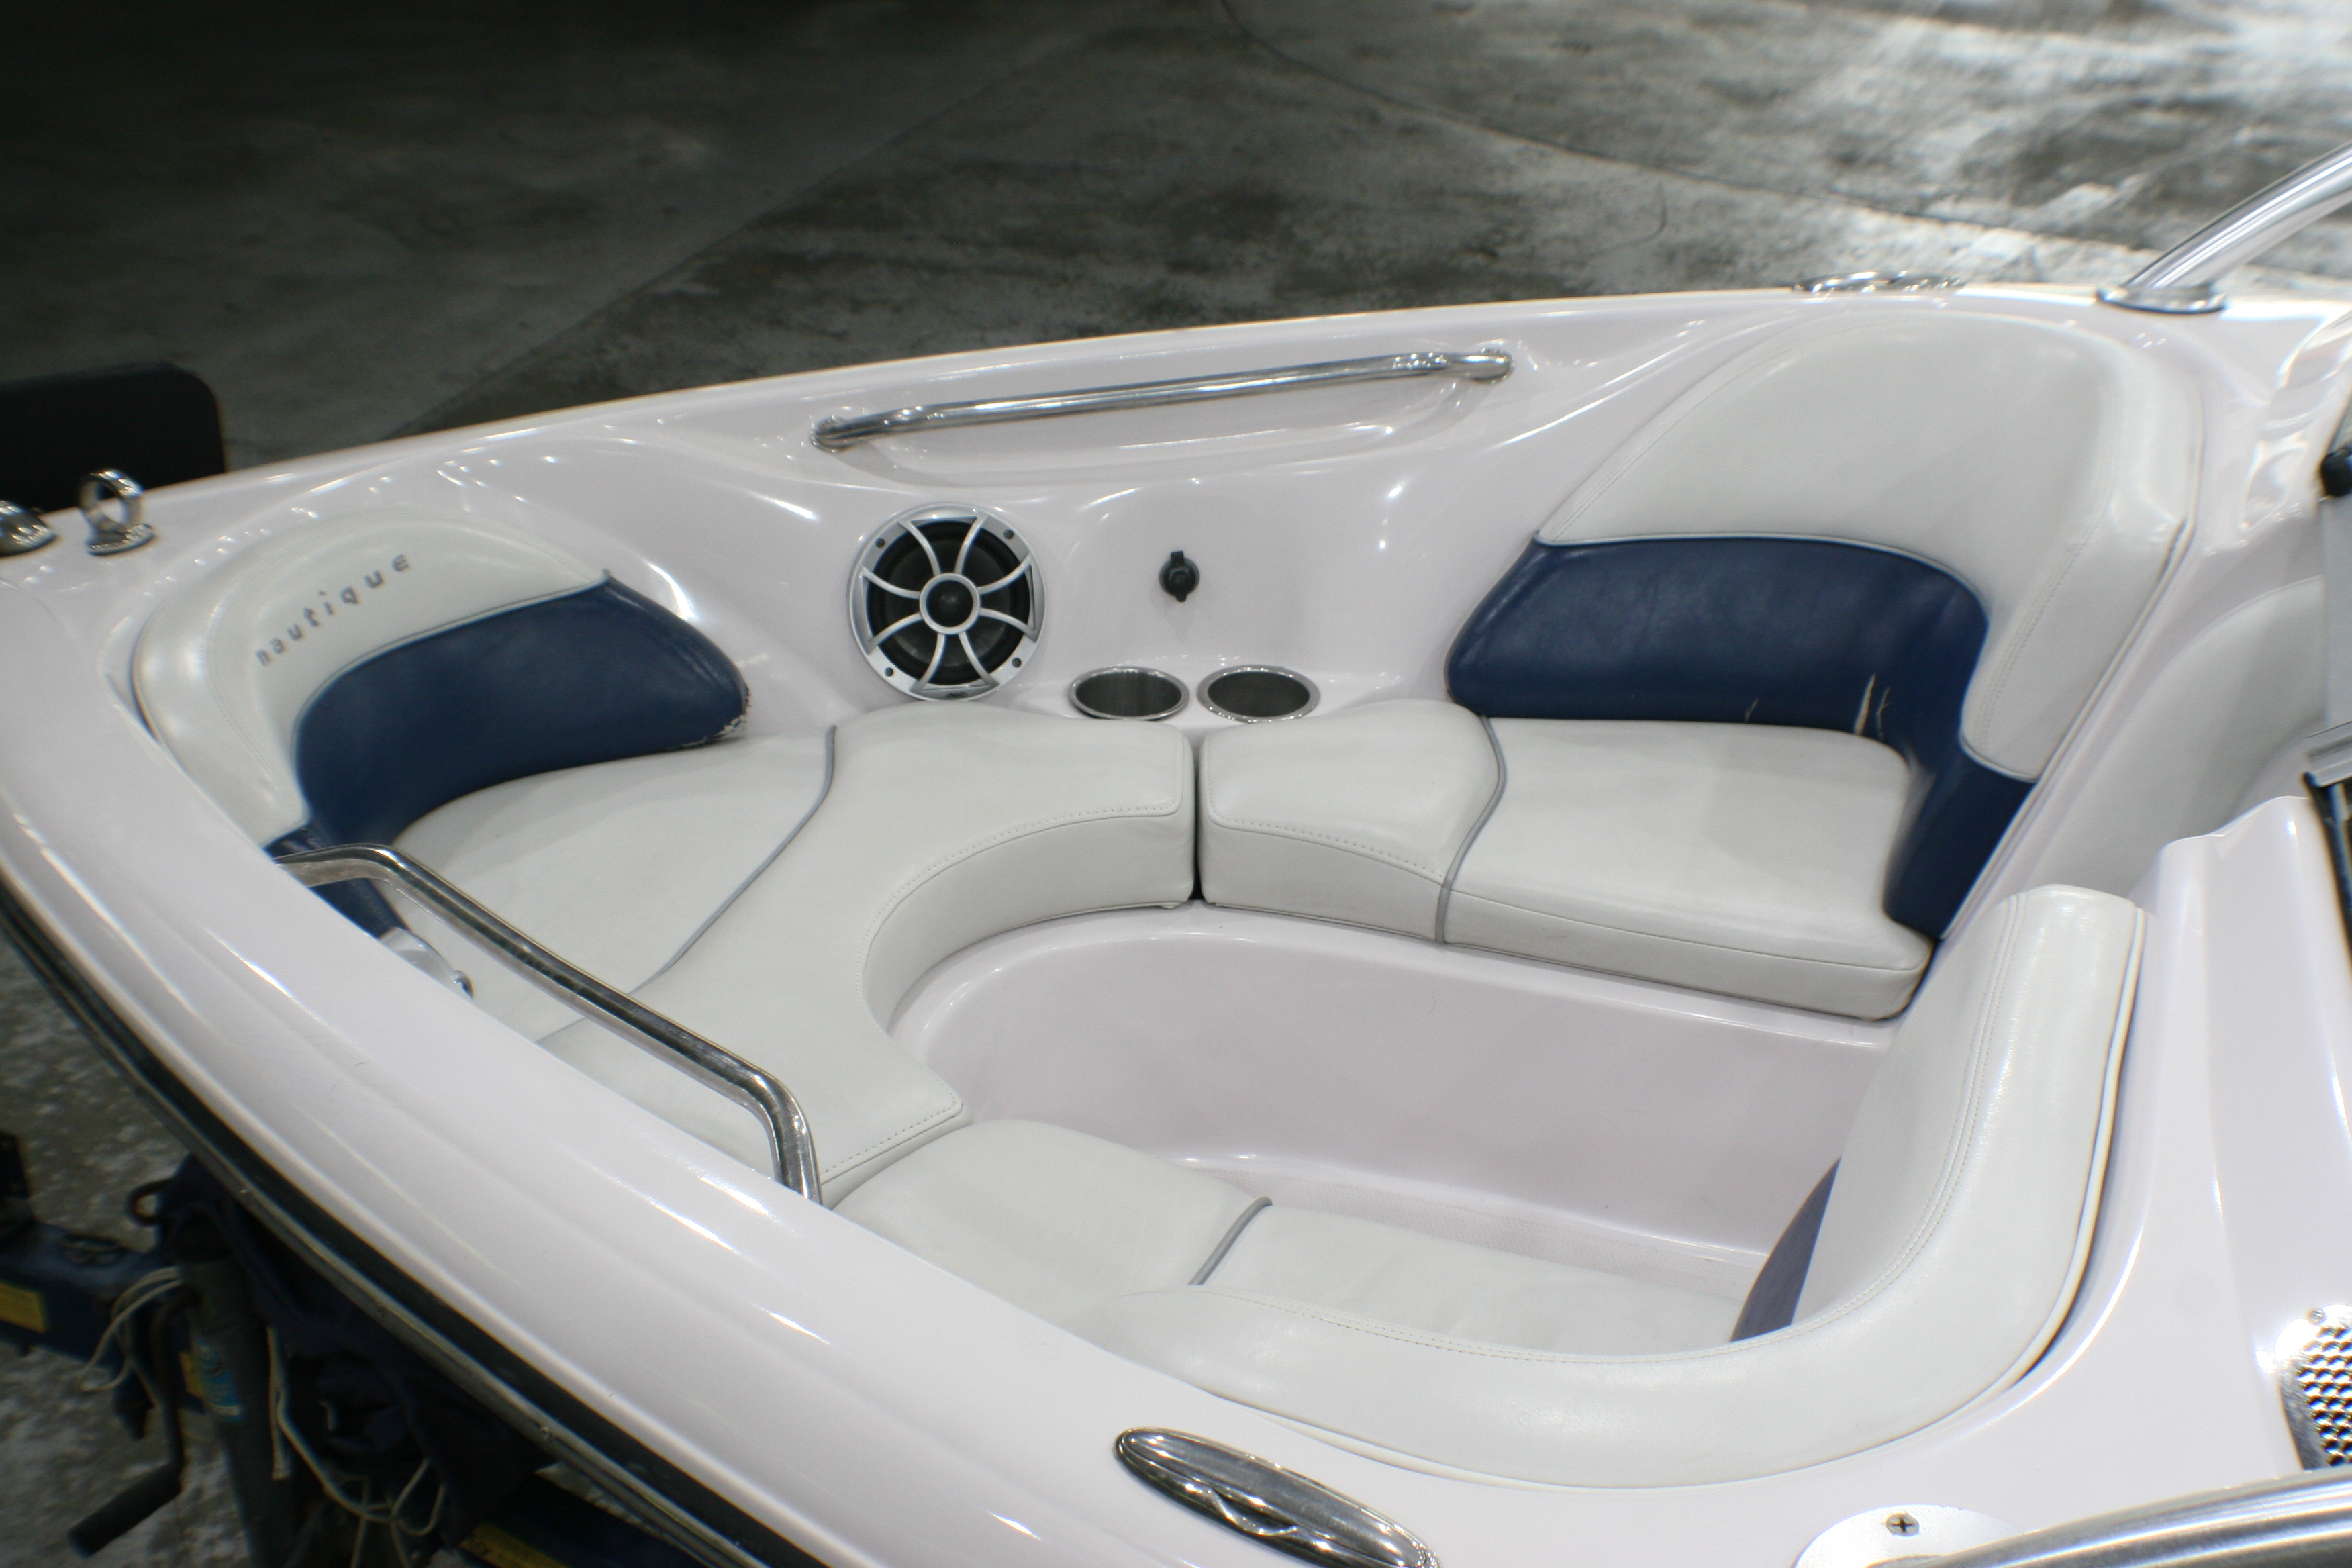 2006 Correct craft SV211TE Power boat for sale in McQueeney, TX - image 4 